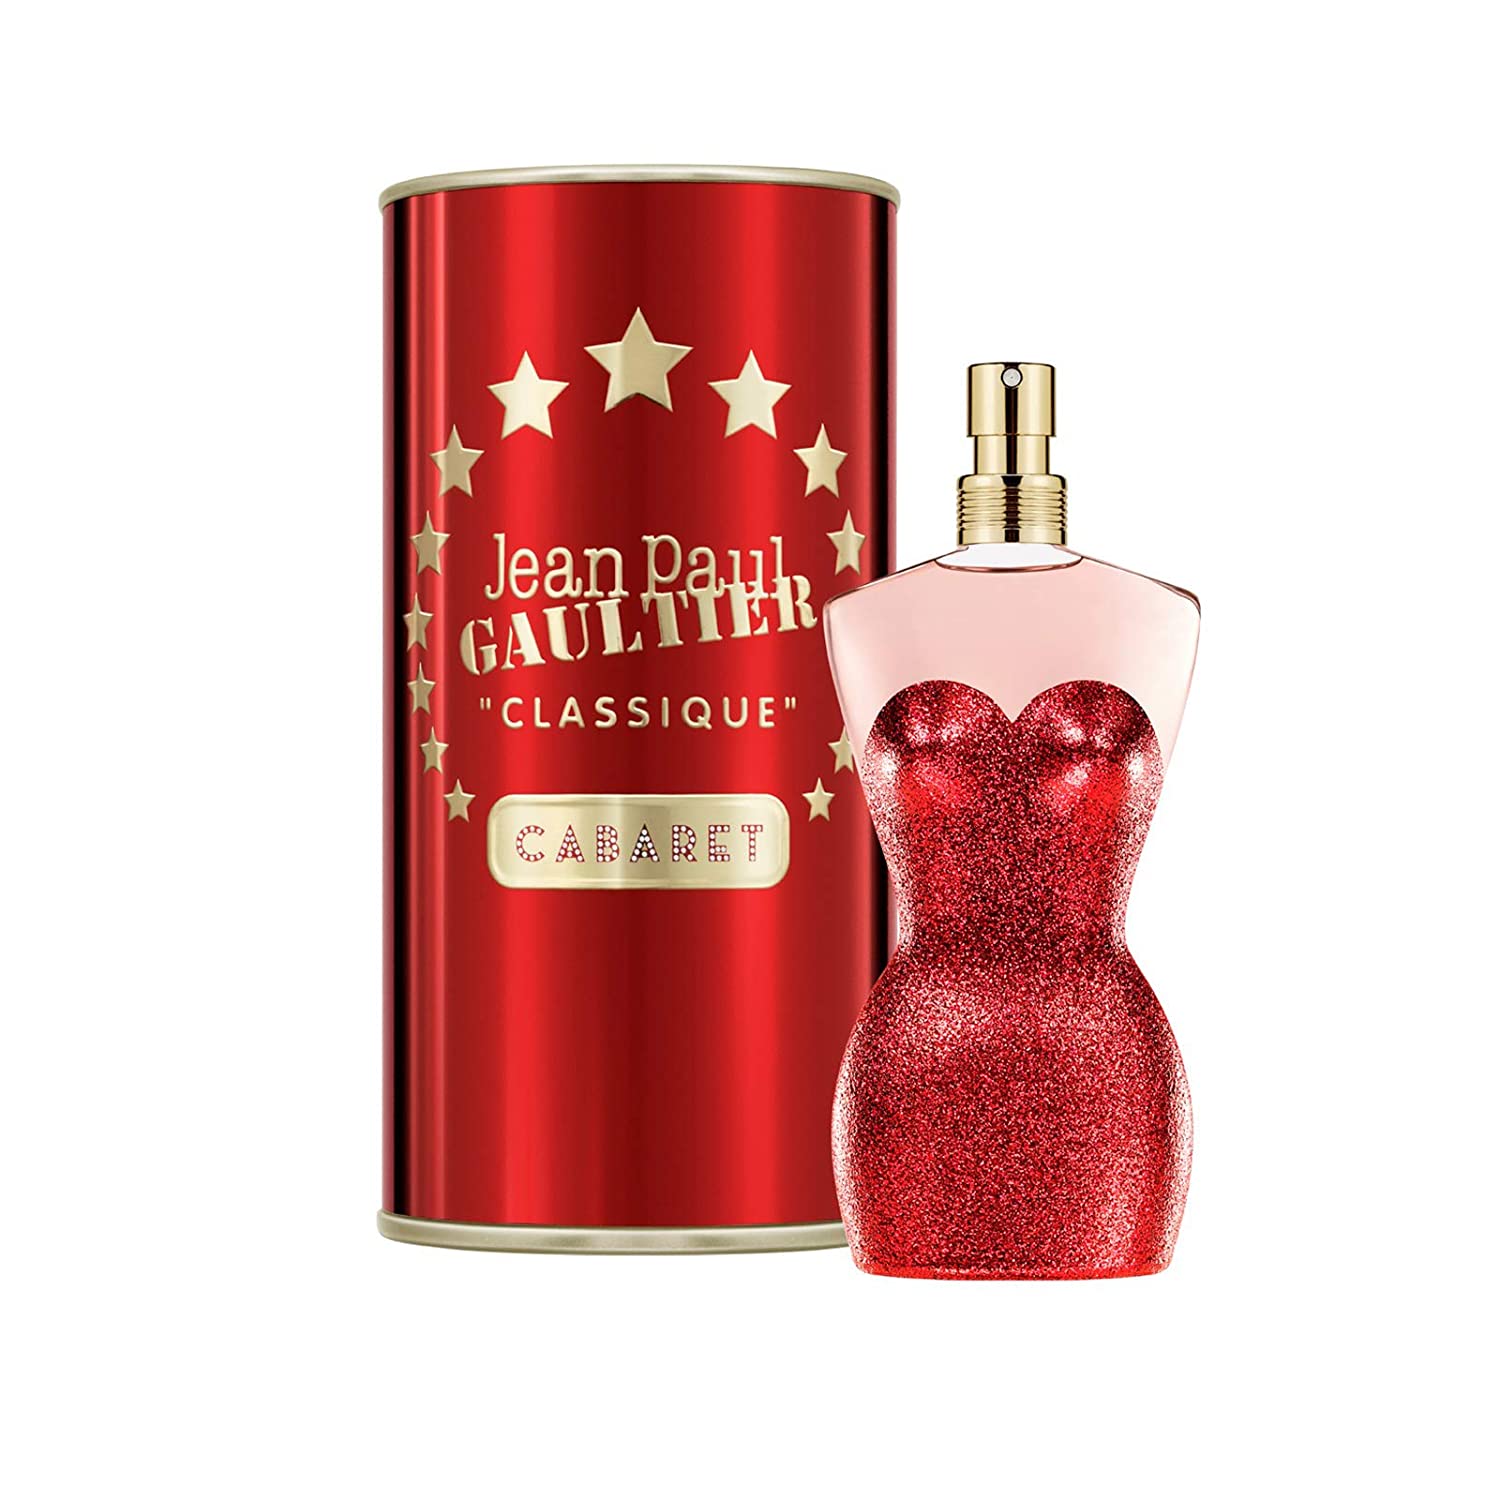 Jean Paul Gaultier Cabaret Perfume by Jean Paul Gaultier, Released in 2019, Jean Paul Gaultier Classique Cabaret is a women’s oriental floral fragrance. Packaged in a delightfully designed bottle shaped like a red sequined dress, this scent starts with a single top note of ginger. Its familiar spicy sharp aroma lends an invigorating opening, which is followed by a single orange blossom note in the heart. This fresh floral note lends its familiar bitter and sweet tones to the blend before vanilla paired with ambergris create this scent’s base with their warm, salty, marine and sensual accords.